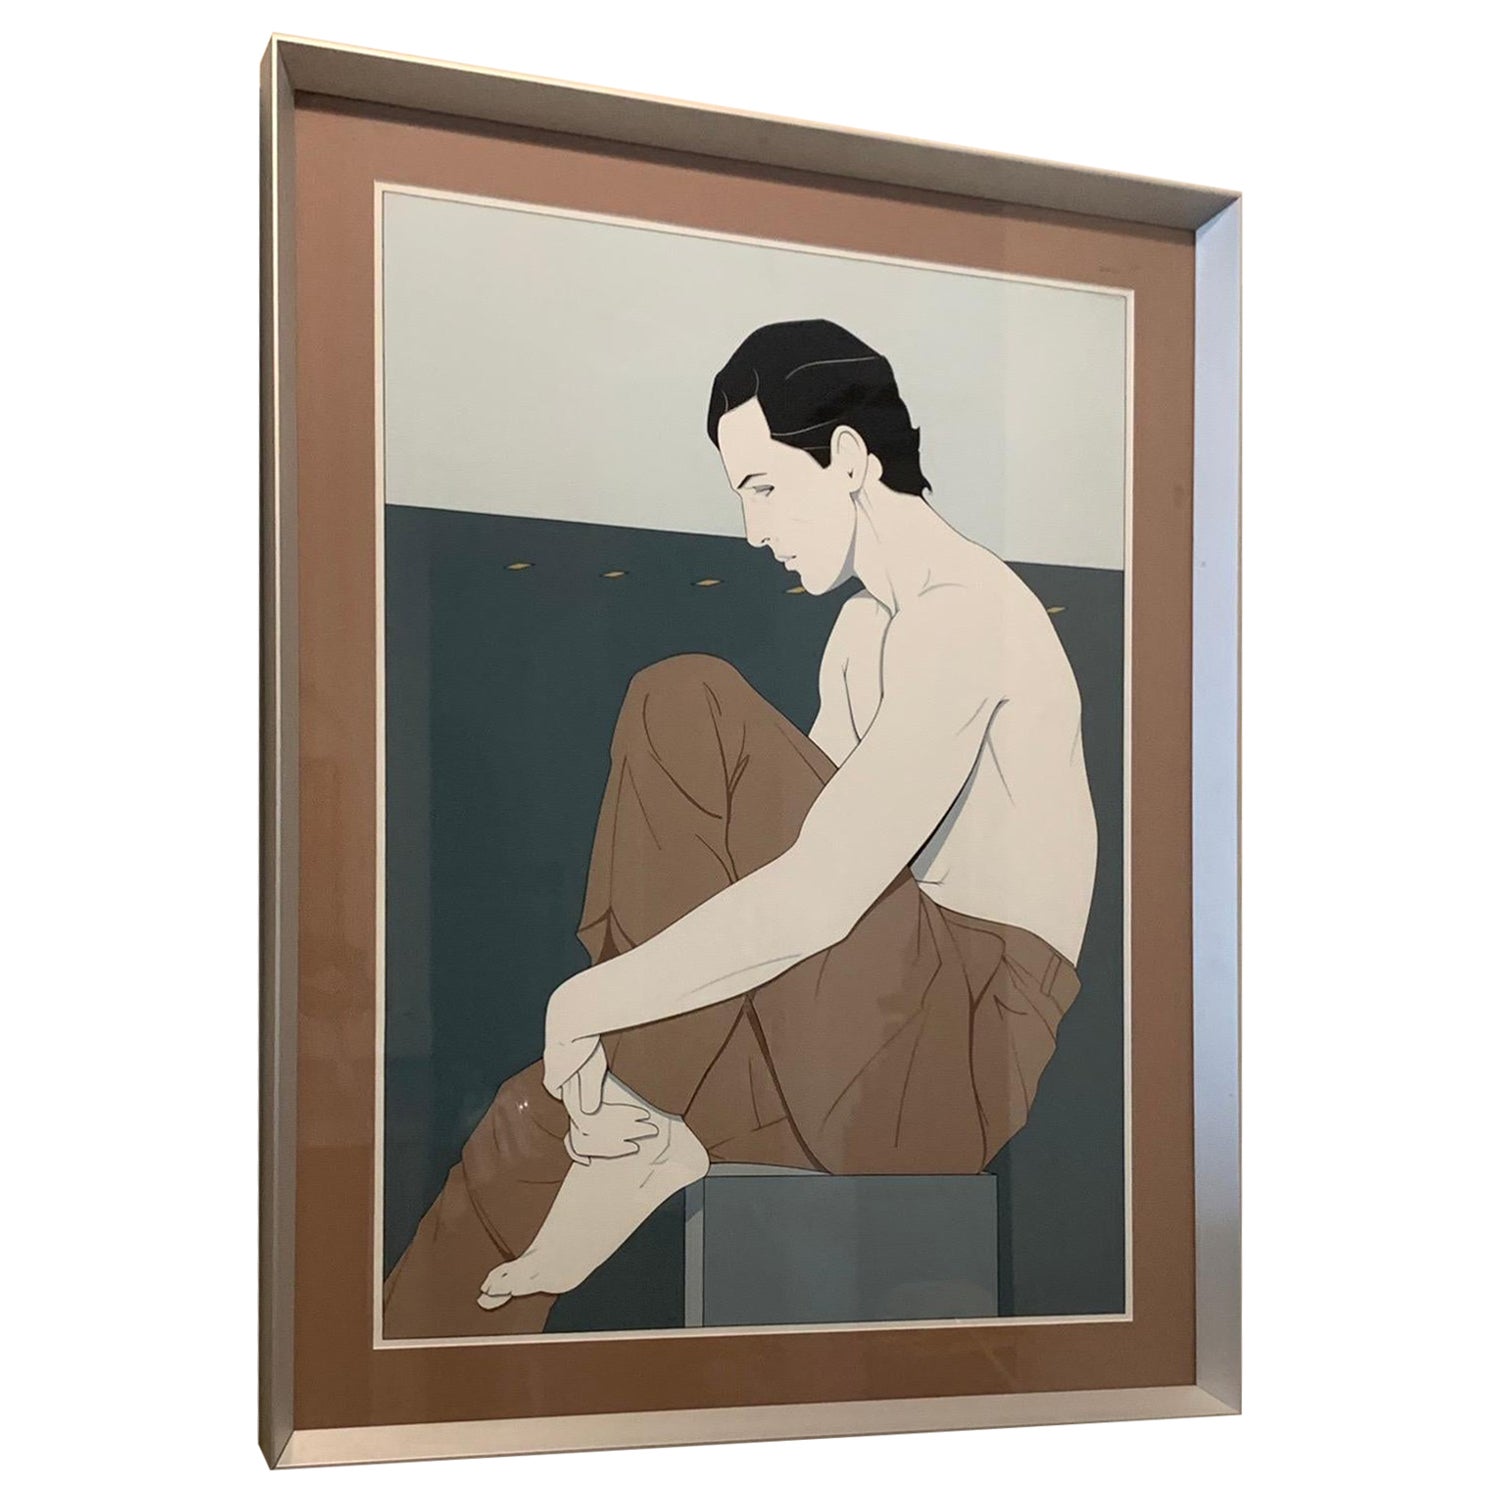 Patrick Nagel “Limited Edition of 40 Pcs” Seated Man Silkscreen, Framed